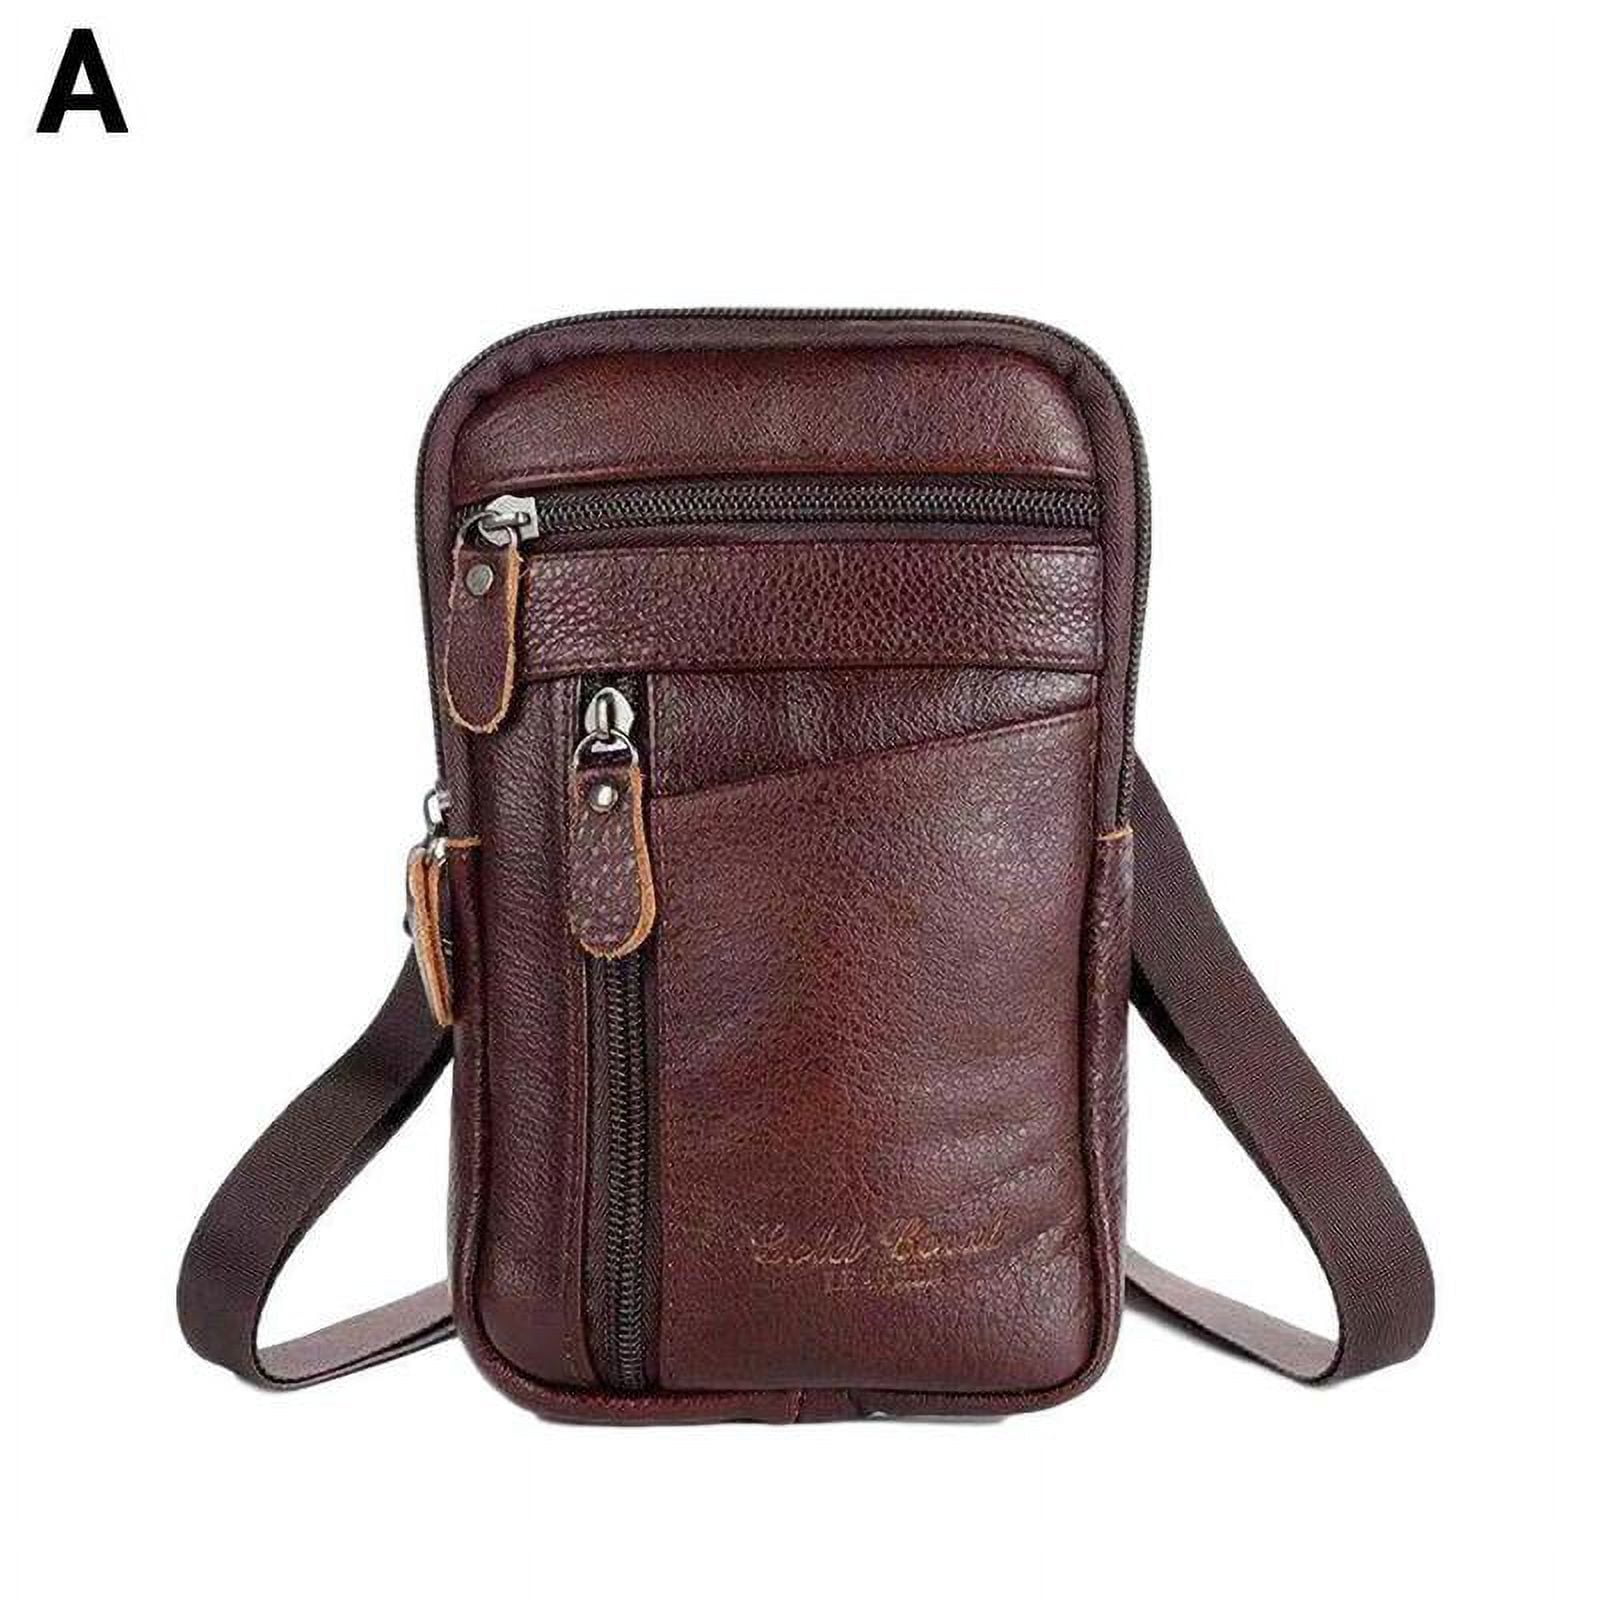 Men Leather Bags - Buy Men Leather Bags online in India